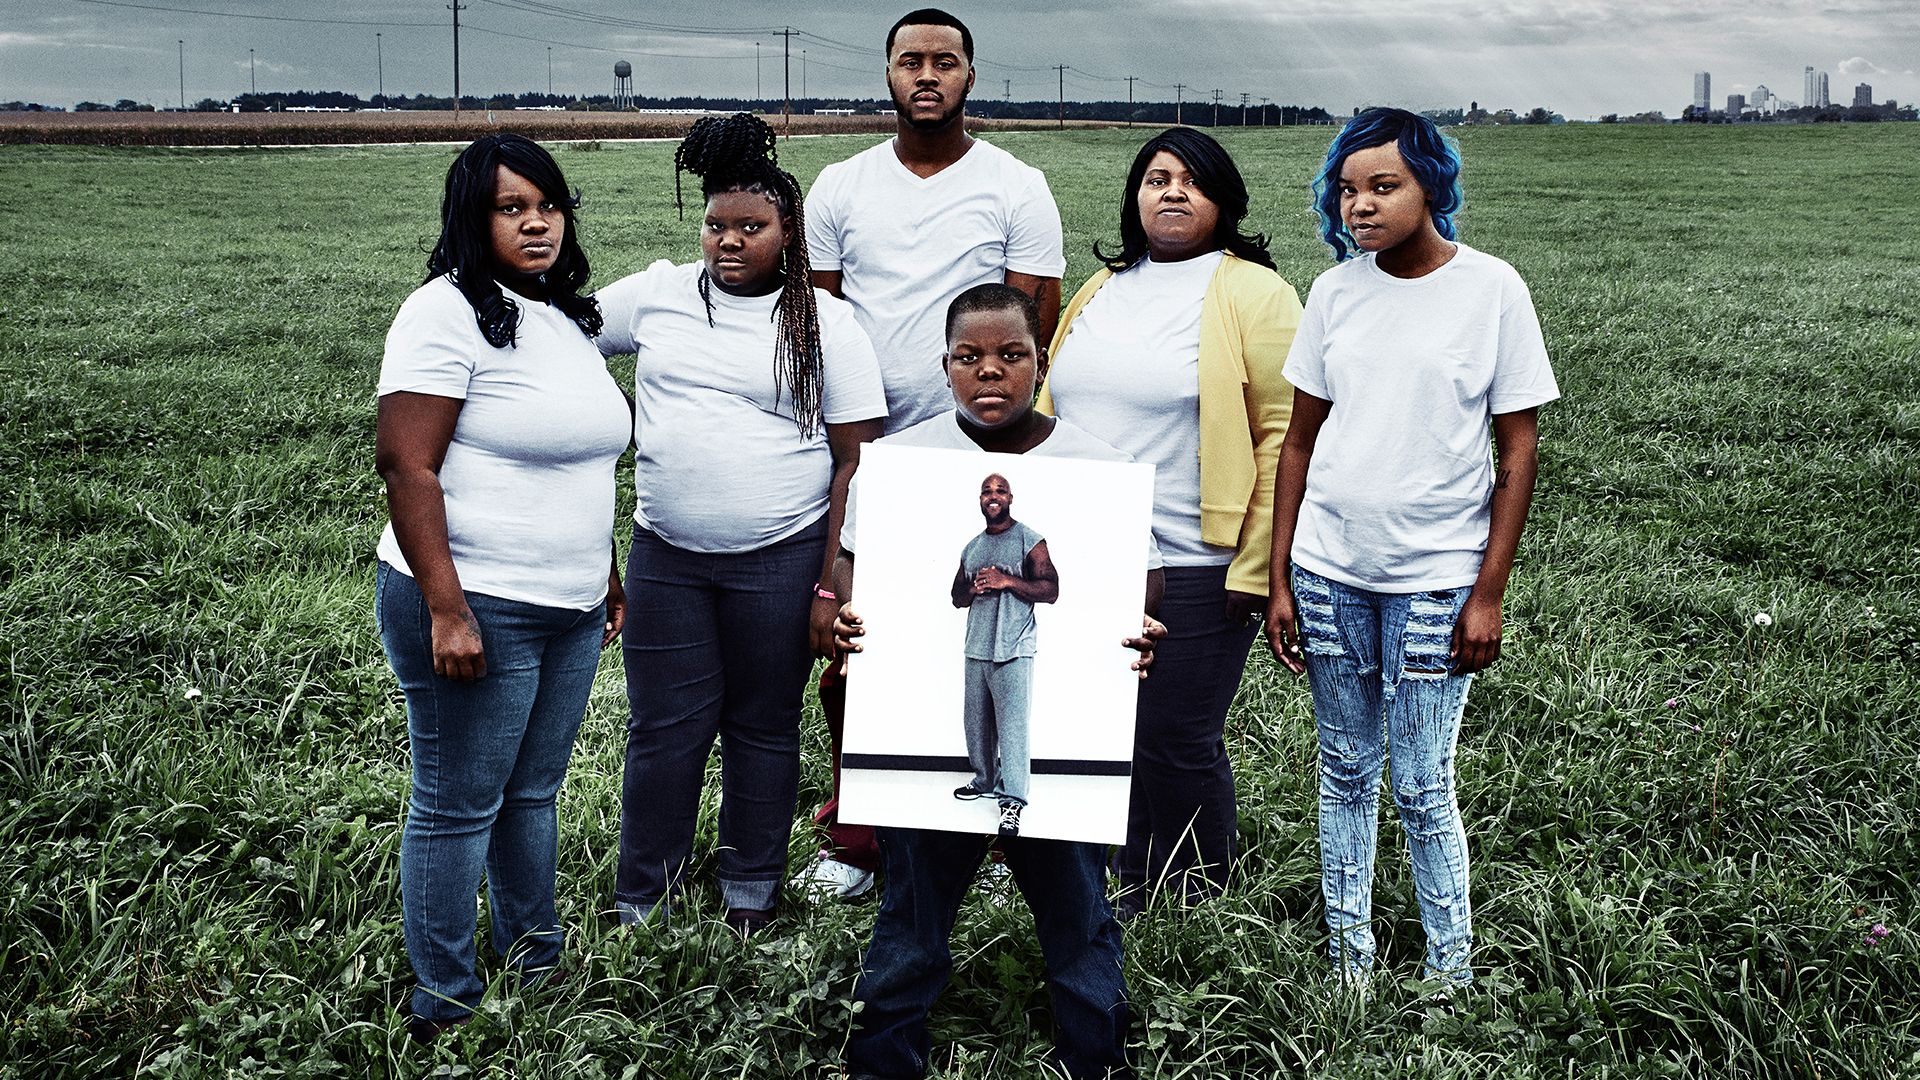 The Walker family poses with a photo of their incarcerated father and husband, Baron, in a still from Milwaukee 53206. Image courtesy of Transform Films. United States, 2016.